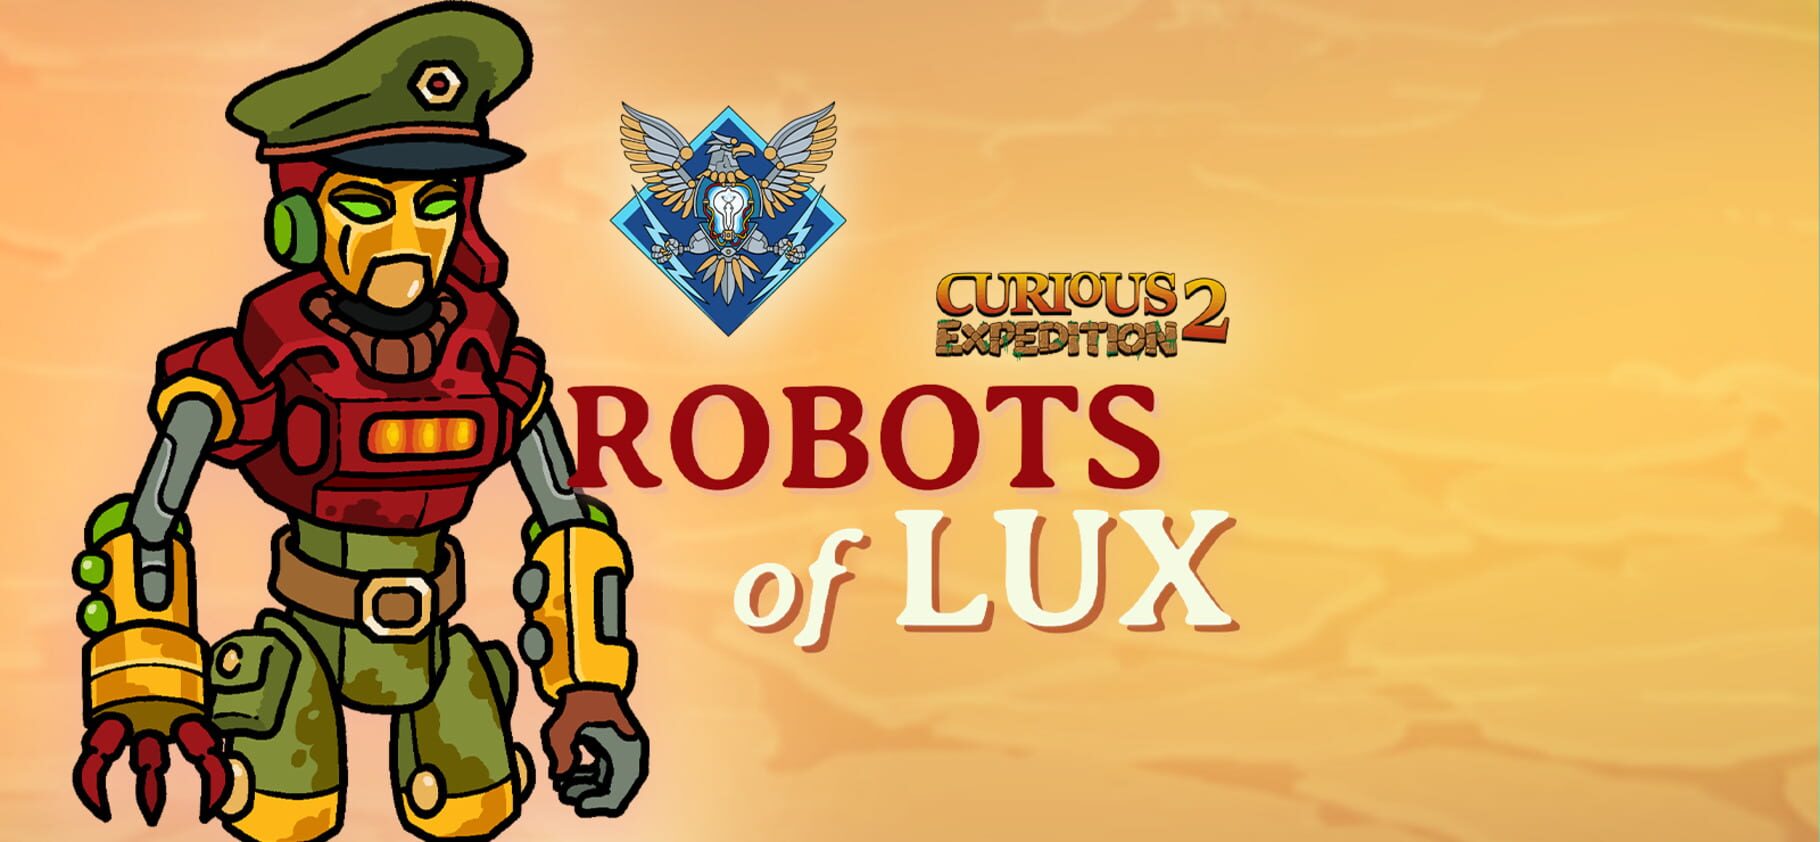 Curious Expedition 2: Robots of Lux artwork